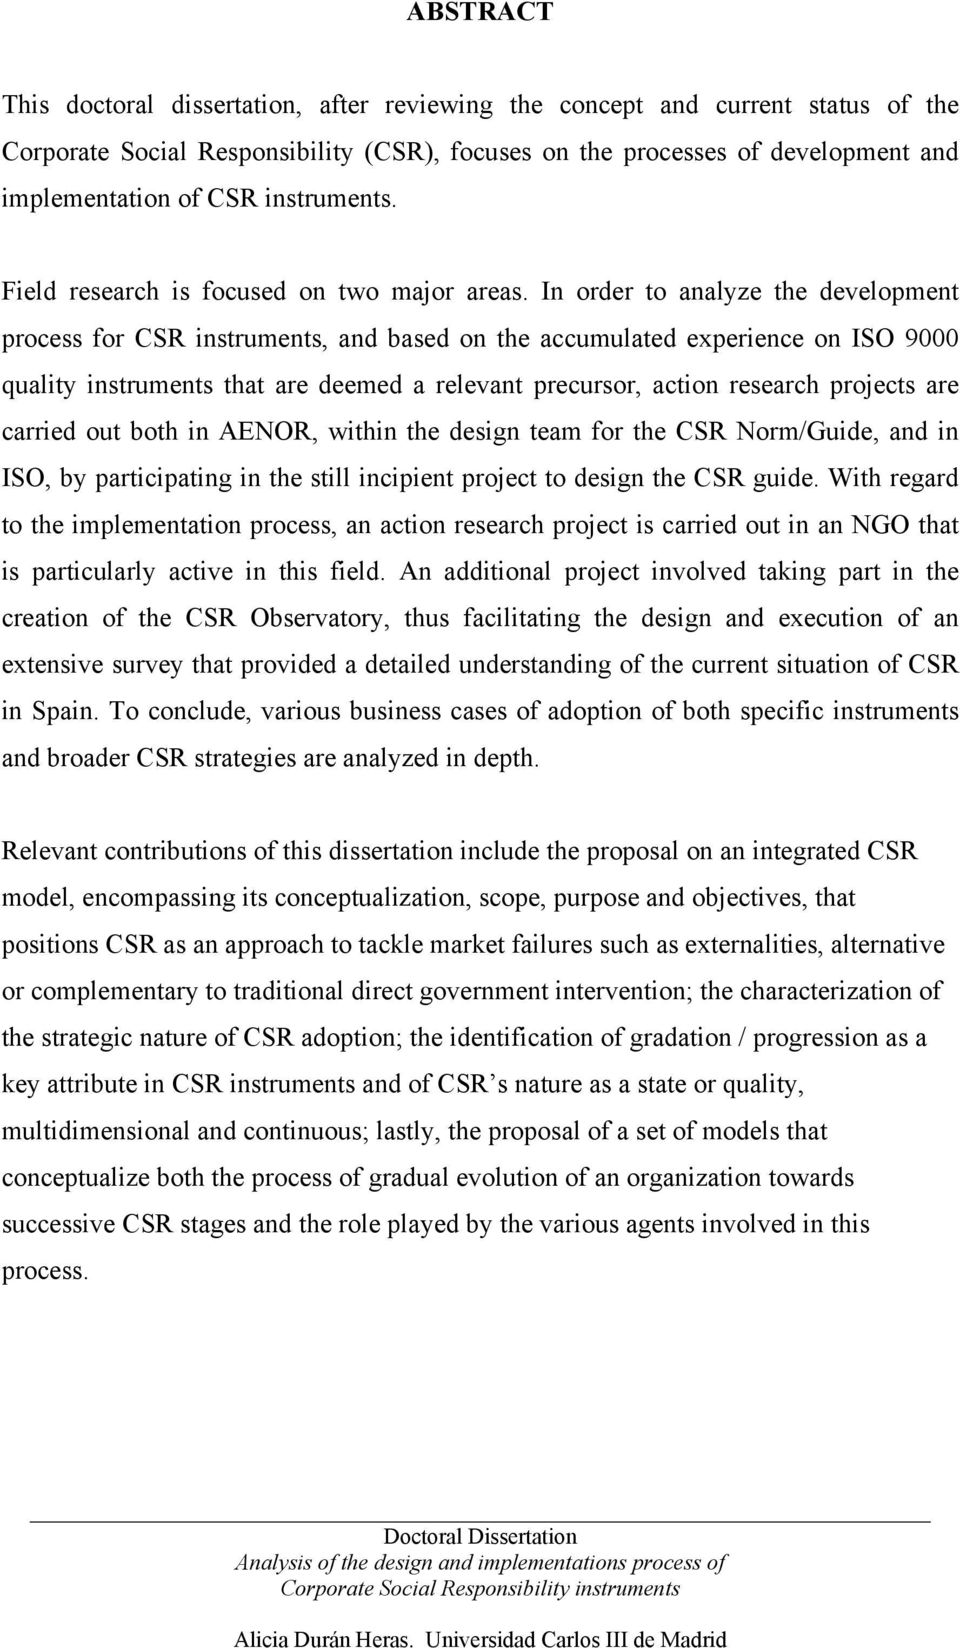 In order to analyze the development process for CSR instruments, and based on the accumulated experience on ISO 9000 quality instruments that are deemed a relevant precursor, action research projects